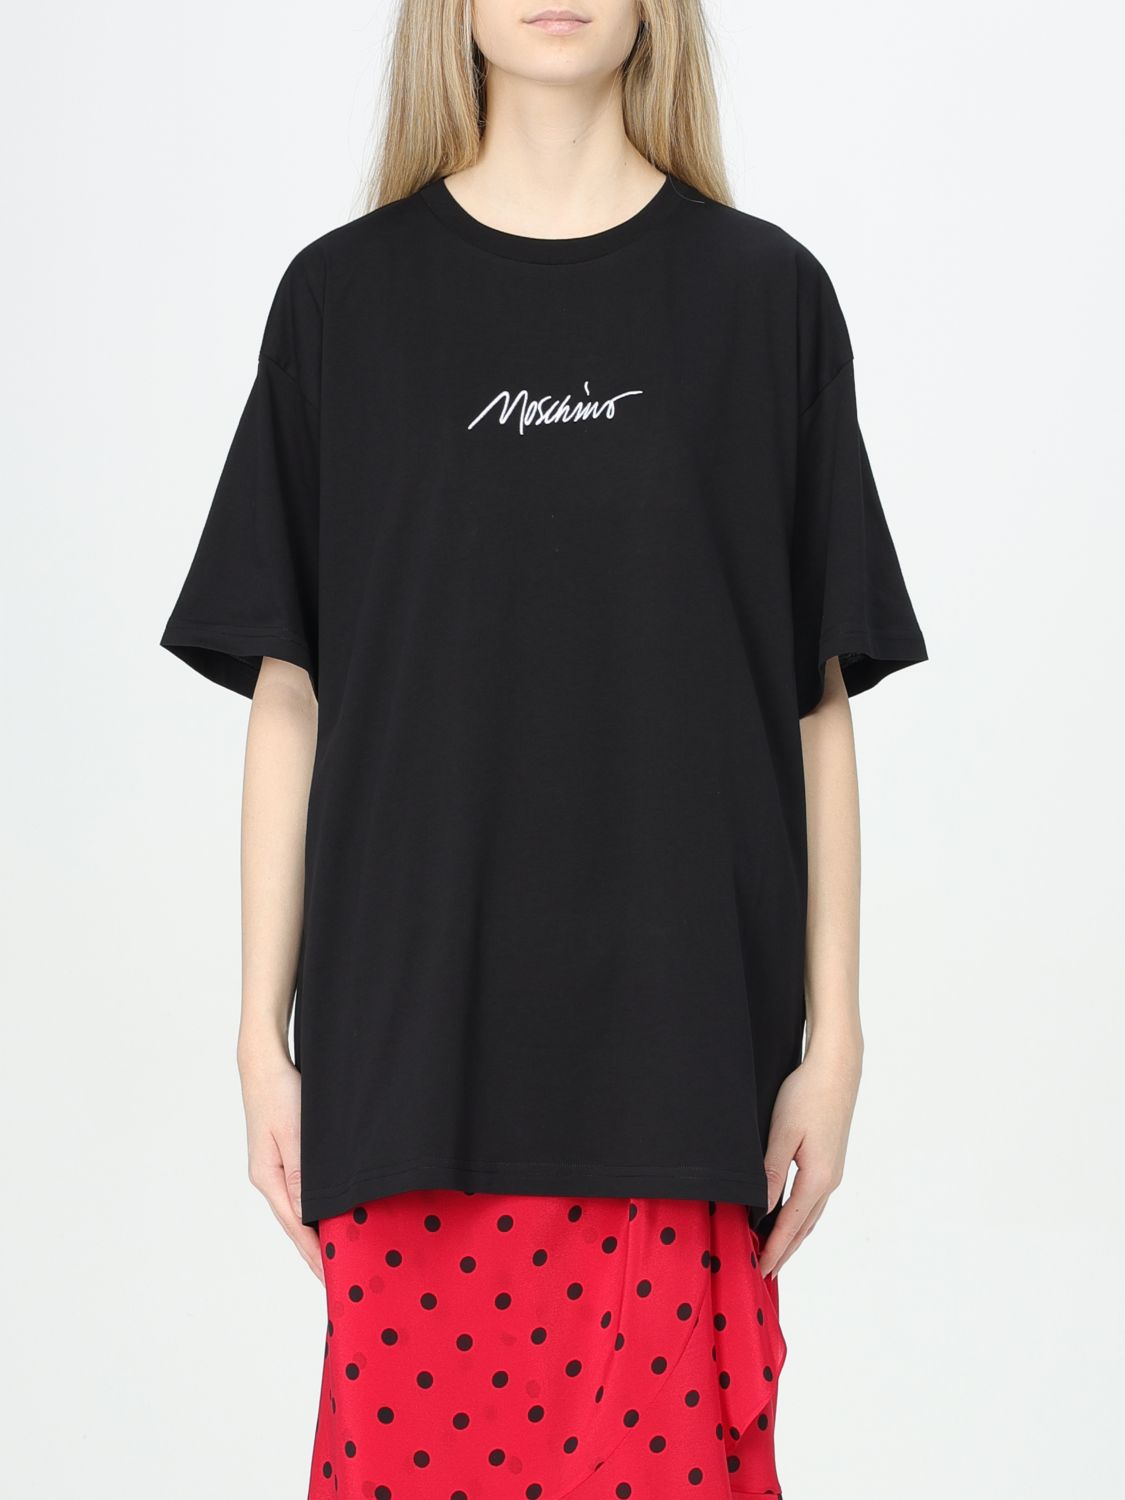 Moschino Couture T-Shirt MOSCHINO COUTURE Woman color Black